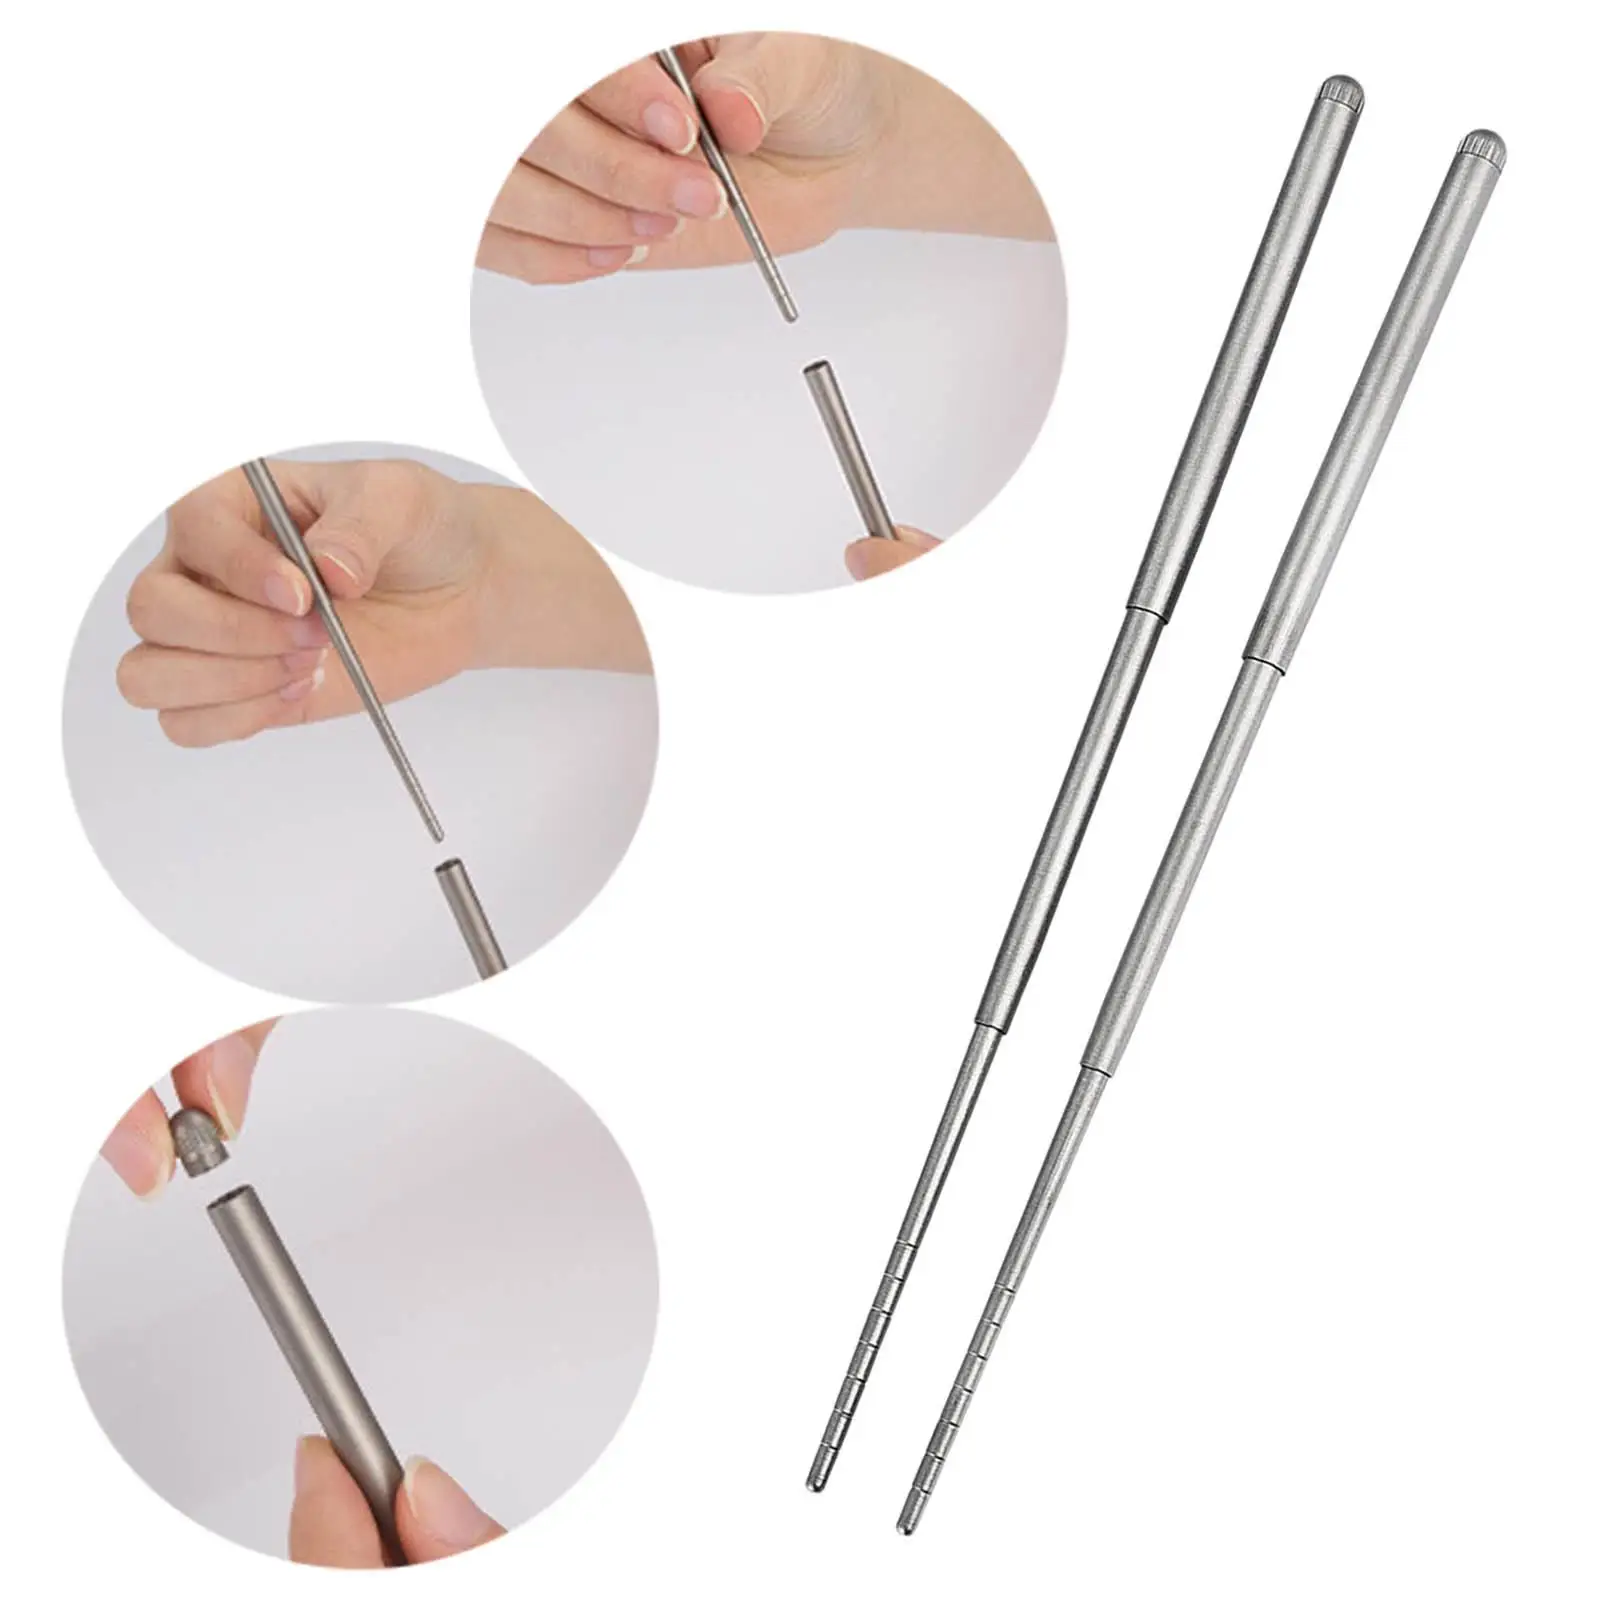 Portable Titanium Folding Chopsticks Cutlery for Camping Outdoor Backpacking